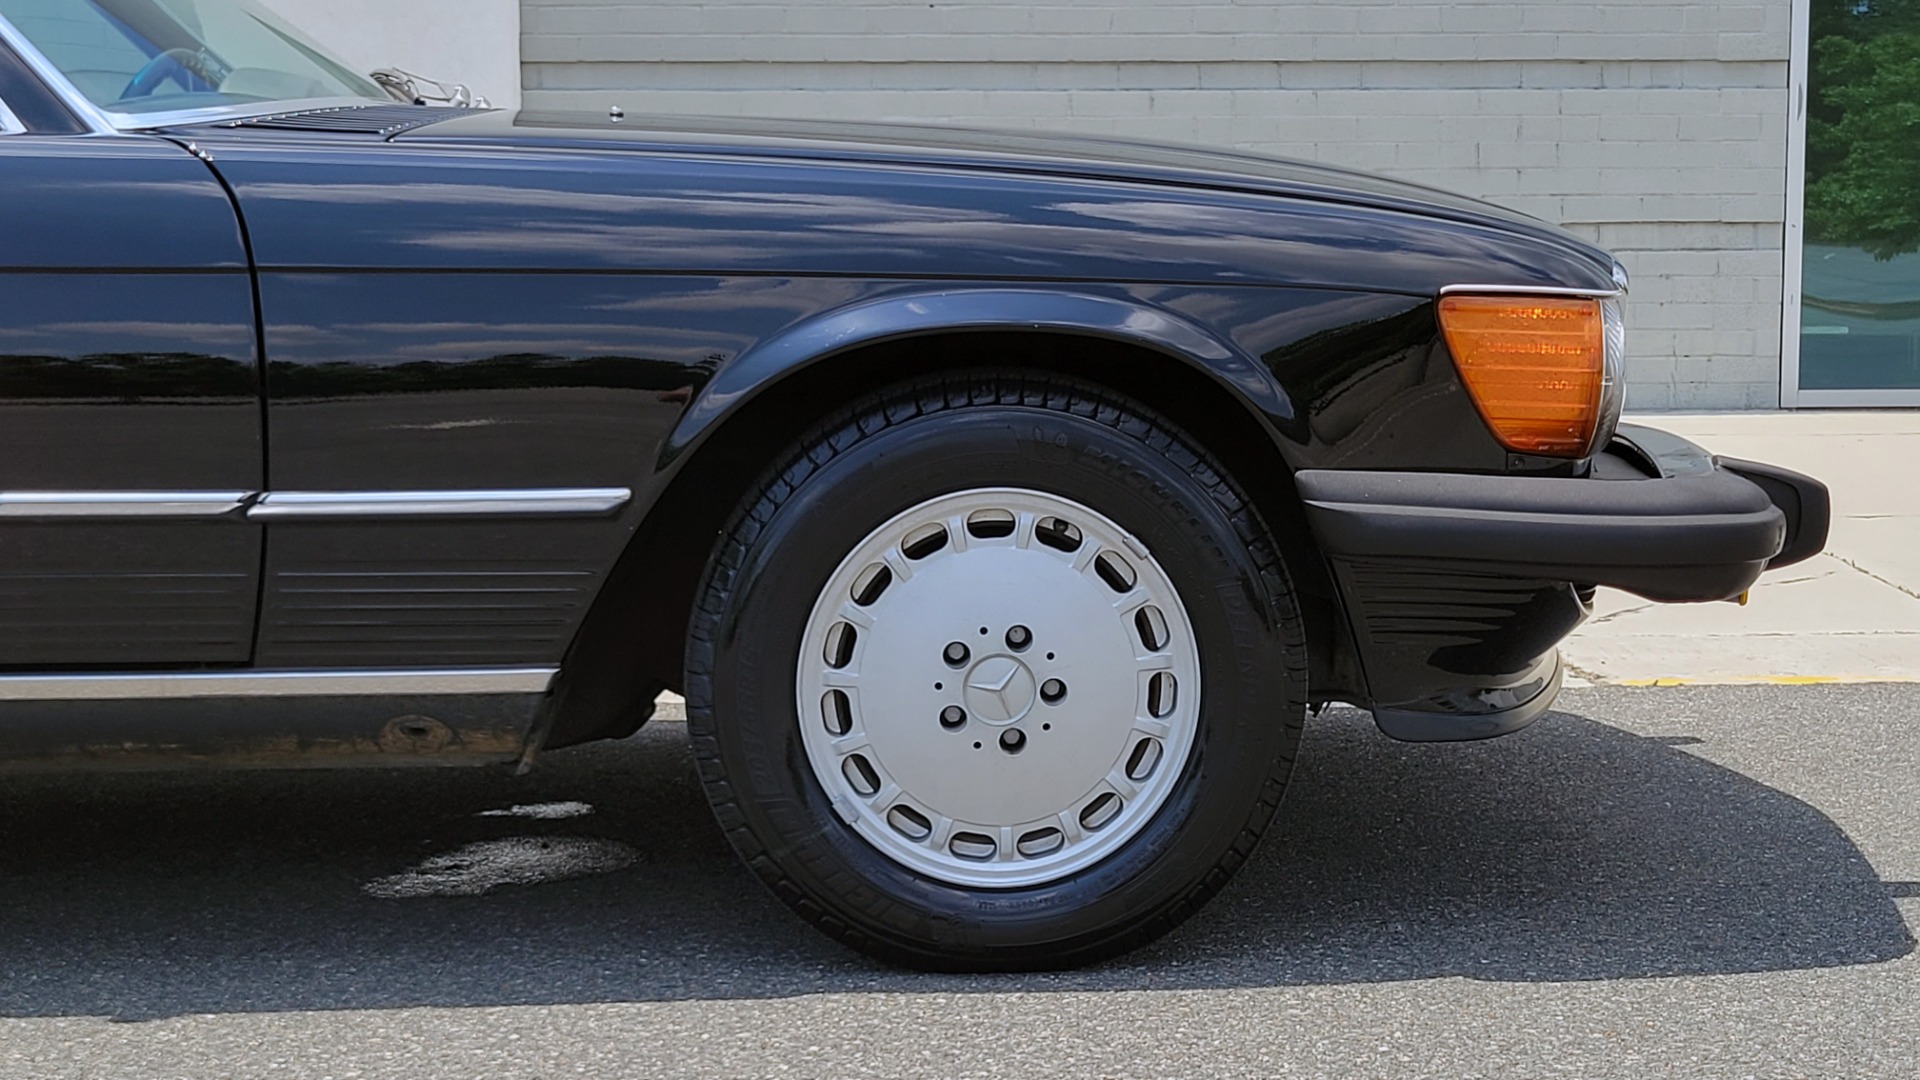 Used 1989 Mercedes-Benz 560 SERIES 560SL ROADSTER / 5.6L V8 227HP / AUTOMATIC TRANS for sale $24,999 at Formula Imports in Charlotte NC 28227 53